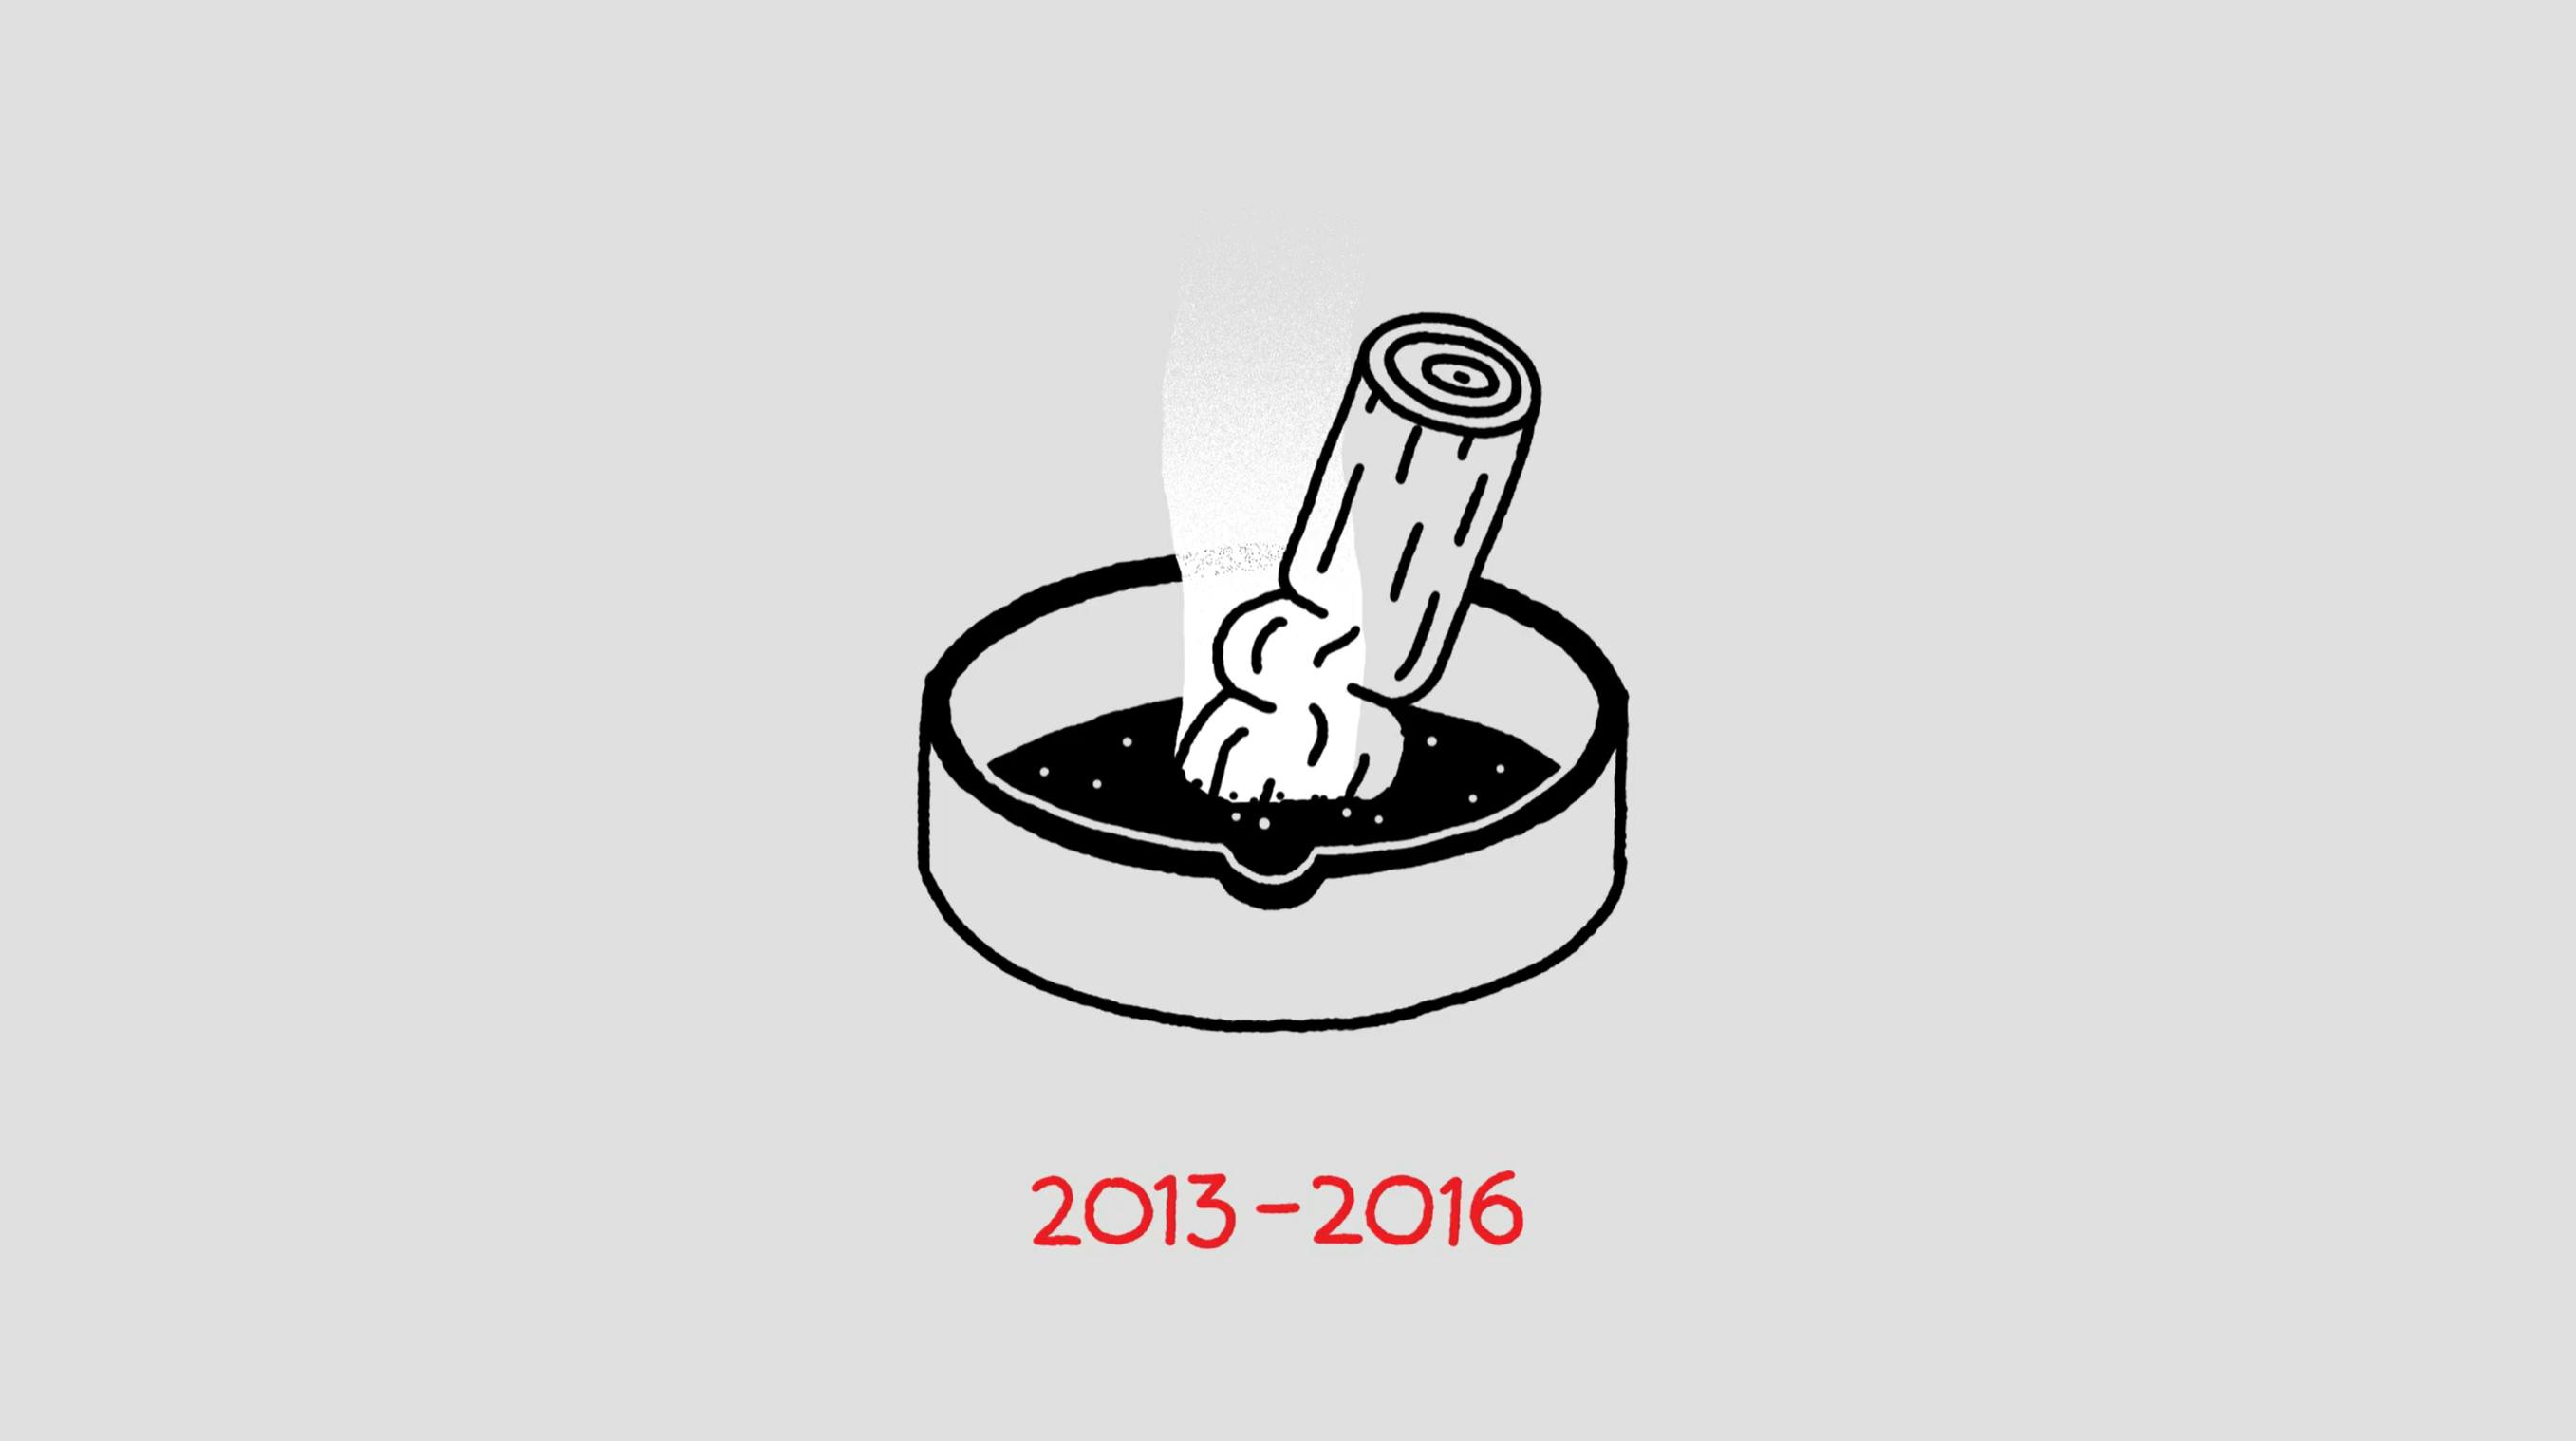 illustration of a wooden log scrunched up into an ash tray, appearing like a burnt out cigarette. 

Red text below it reads "2013-2016"